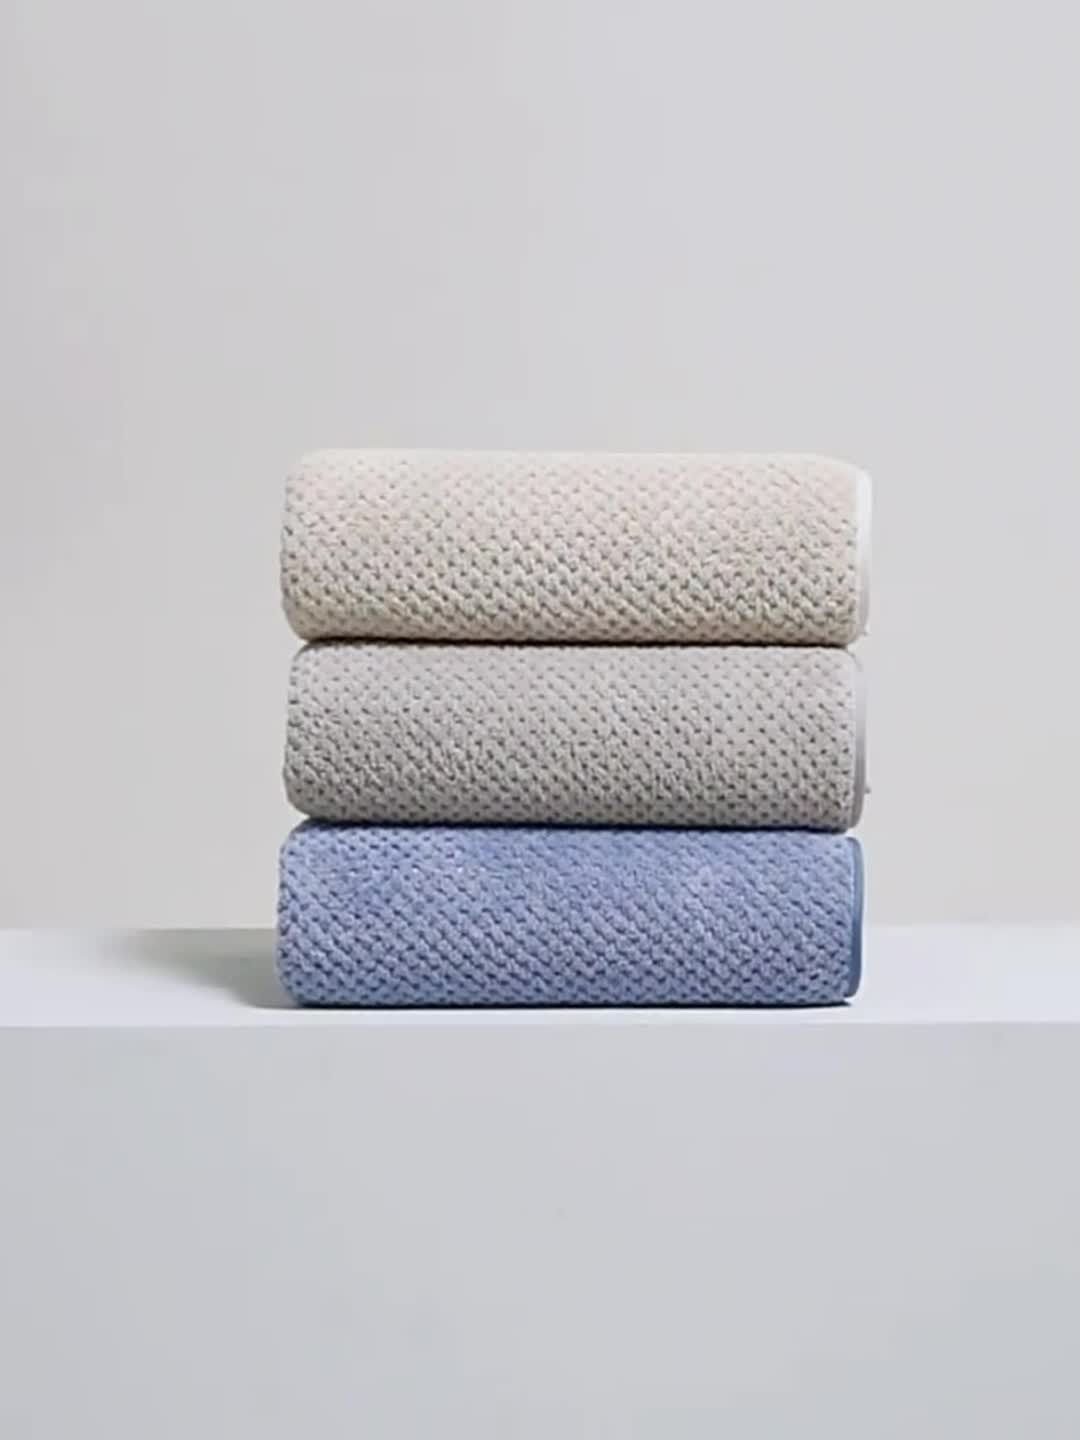 Super Absorbent, Soft, Quick Dry, Lightweight, Plush Microfiber Bath Towels  4 Colors for Shower Pool Beach Bathroom with Cationic Strip and Ripple -  China Microfiber Plush Towels and Striped Bath Towel price